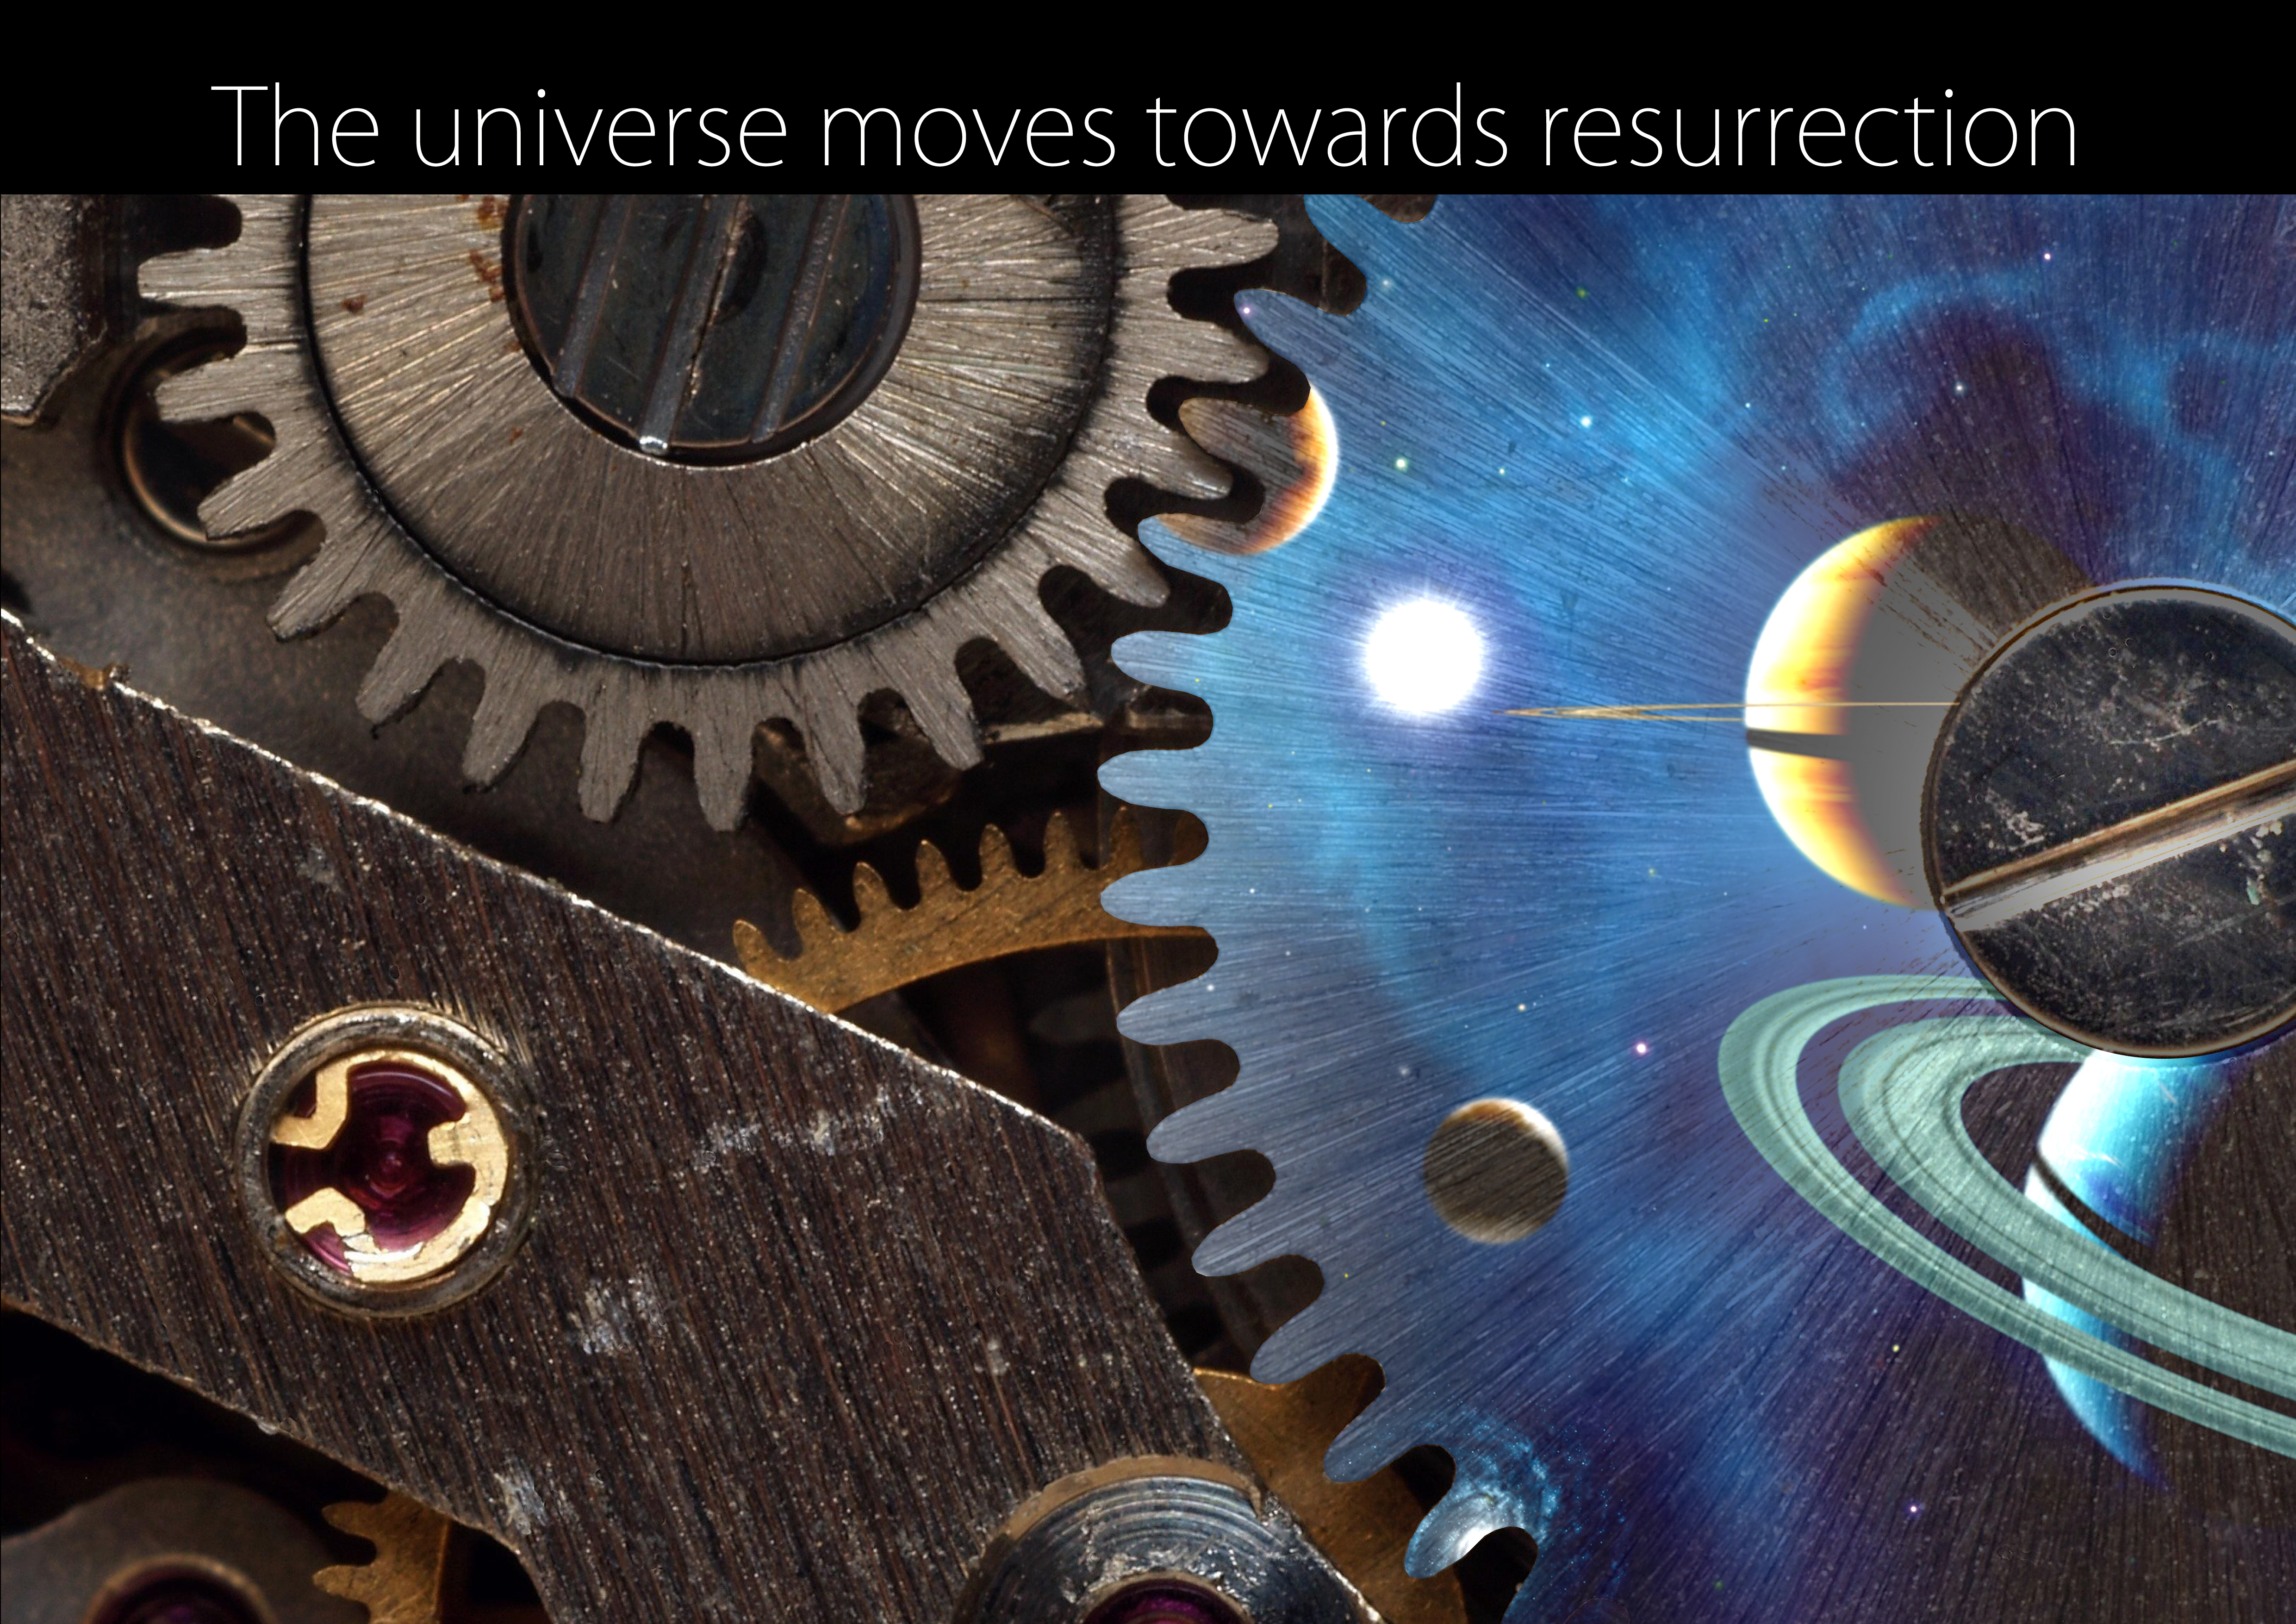 The universe moves to wards resurrection